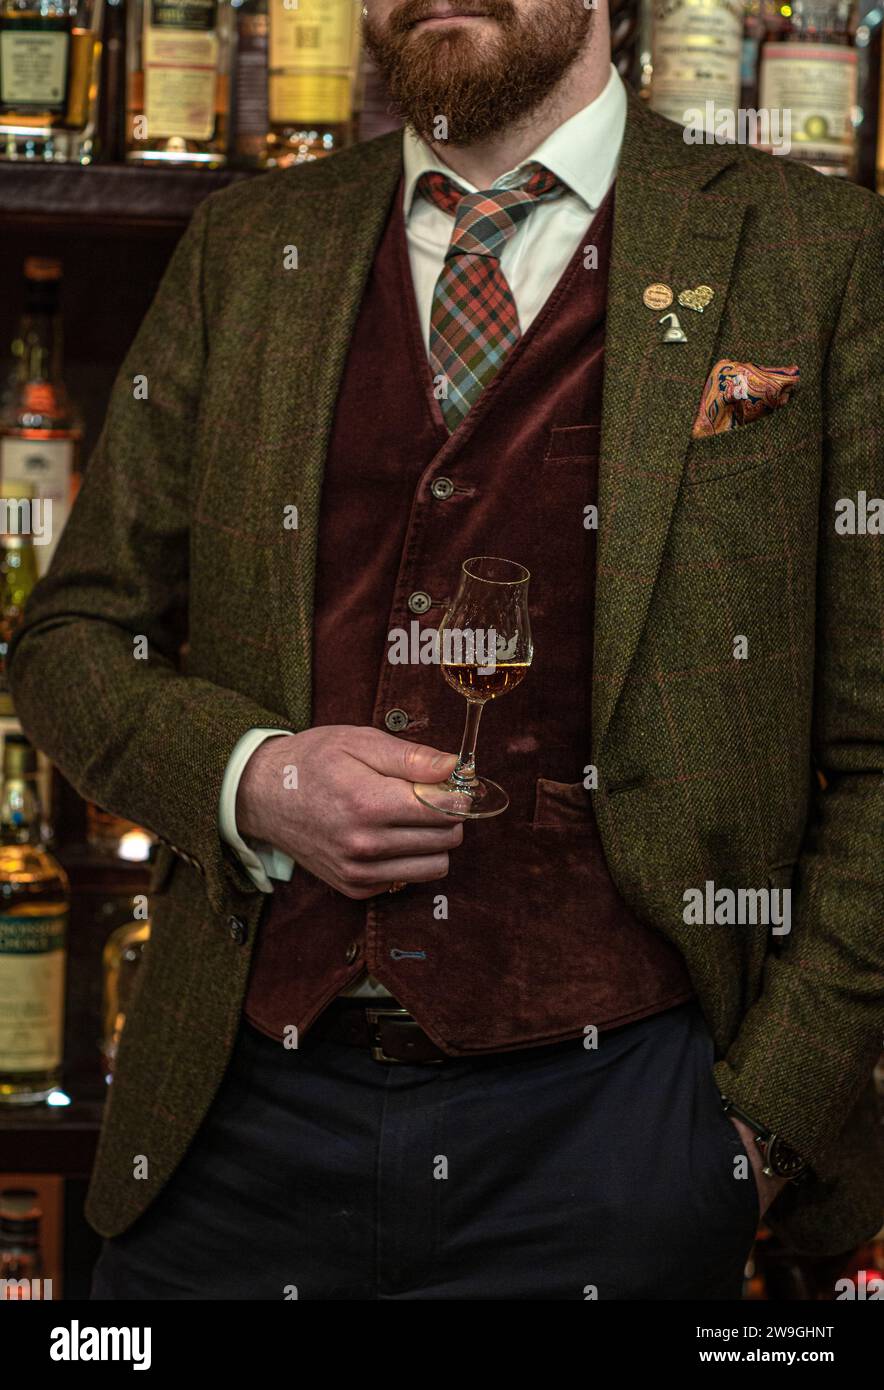 man holding a glass of scotch whisky wearing a suit standing in whisky , Scotland , UK . Stock Photo